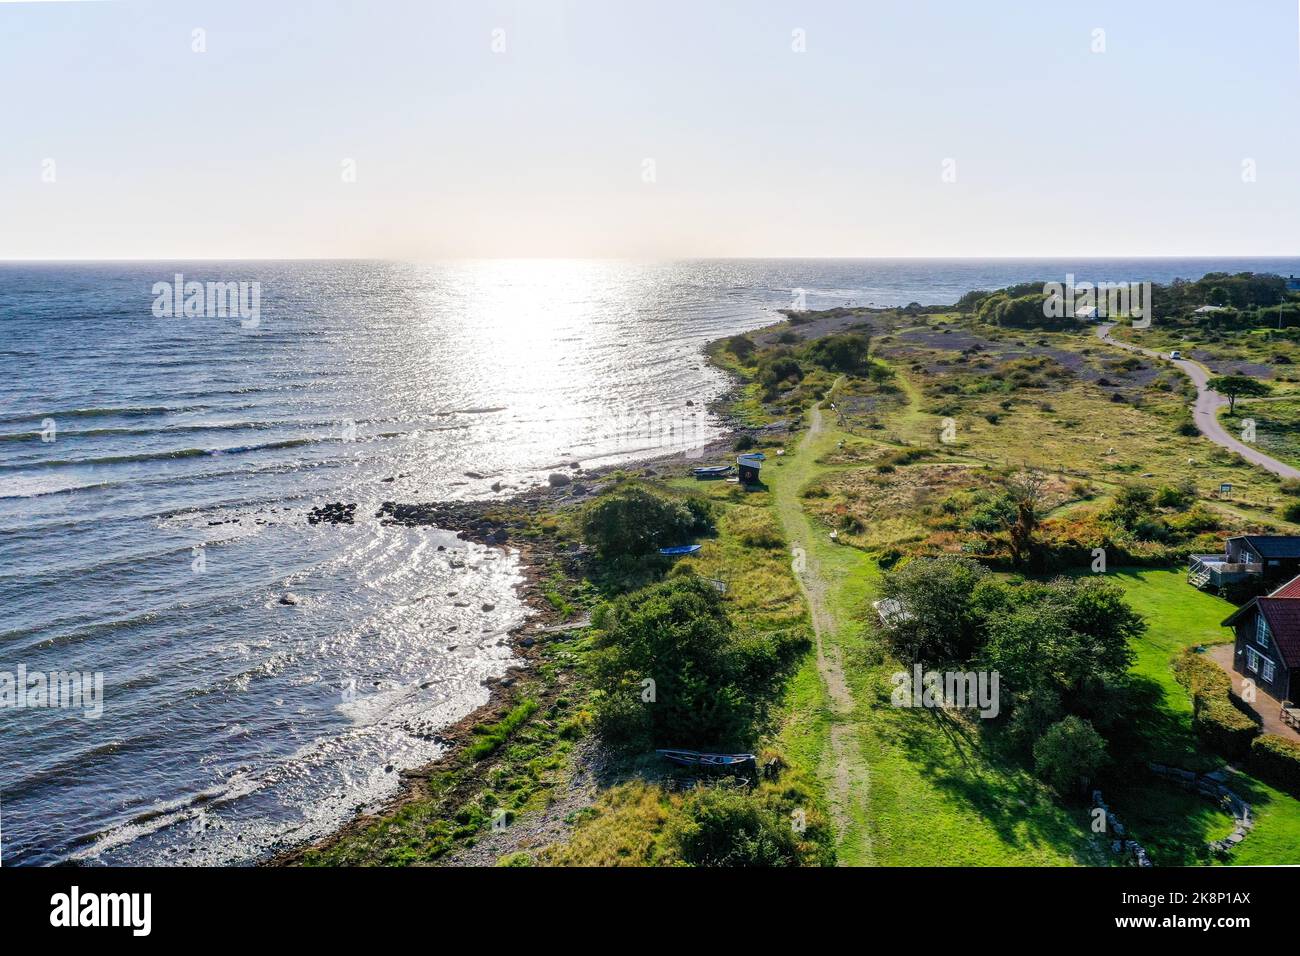 View of the beautiful coastline and sea at Haverdal in south-west Sweden in late afternoon in a sunny, summer's day. Stock Photo